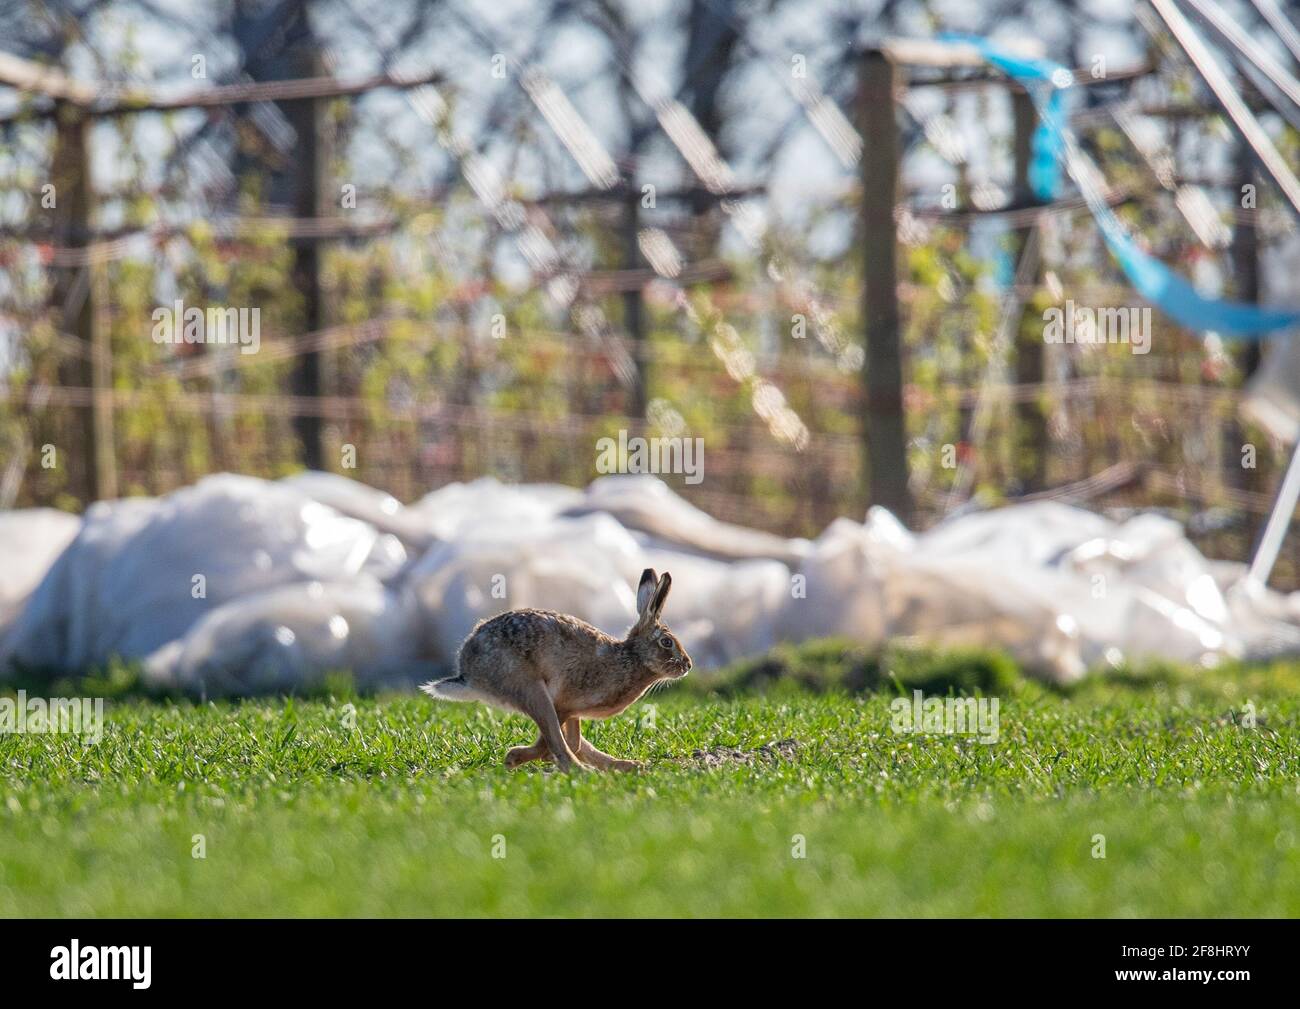 A Brown hare running full pelt across the front of the Polytunnels housing soft fruit . Showing the relationship between Wildlife and Agriculture. Stock Photo